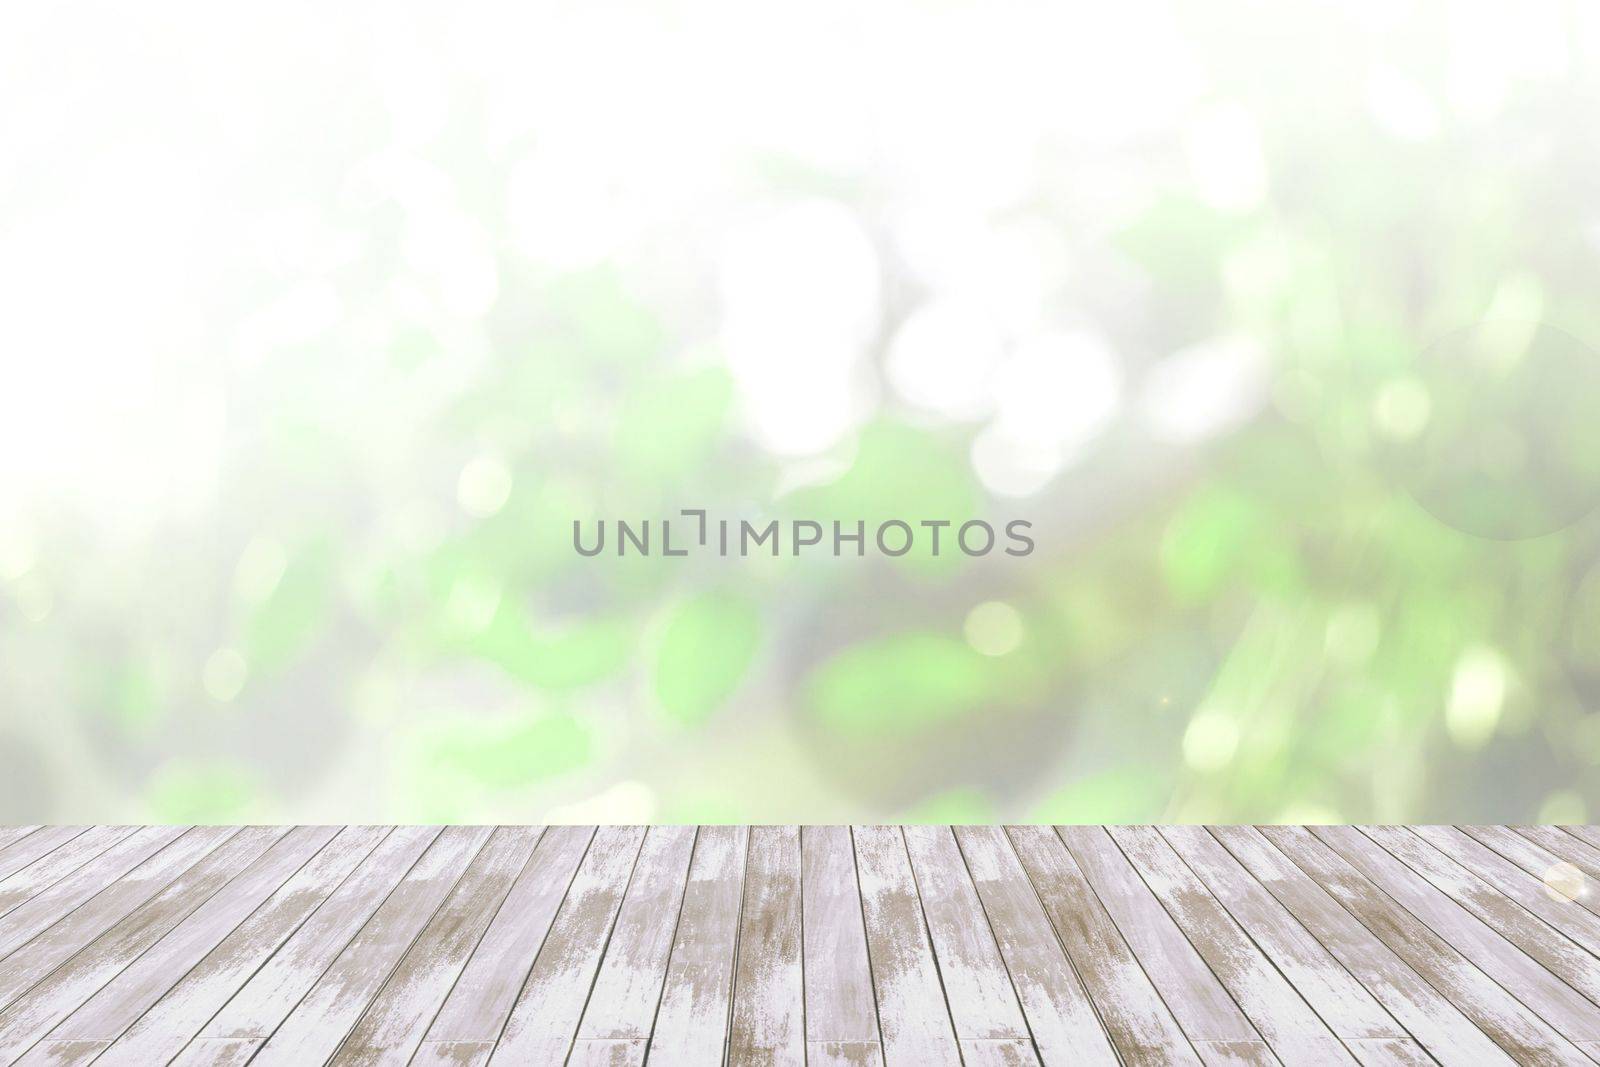 Blurred abstract background of looked-up tree in green tone with wooden floor